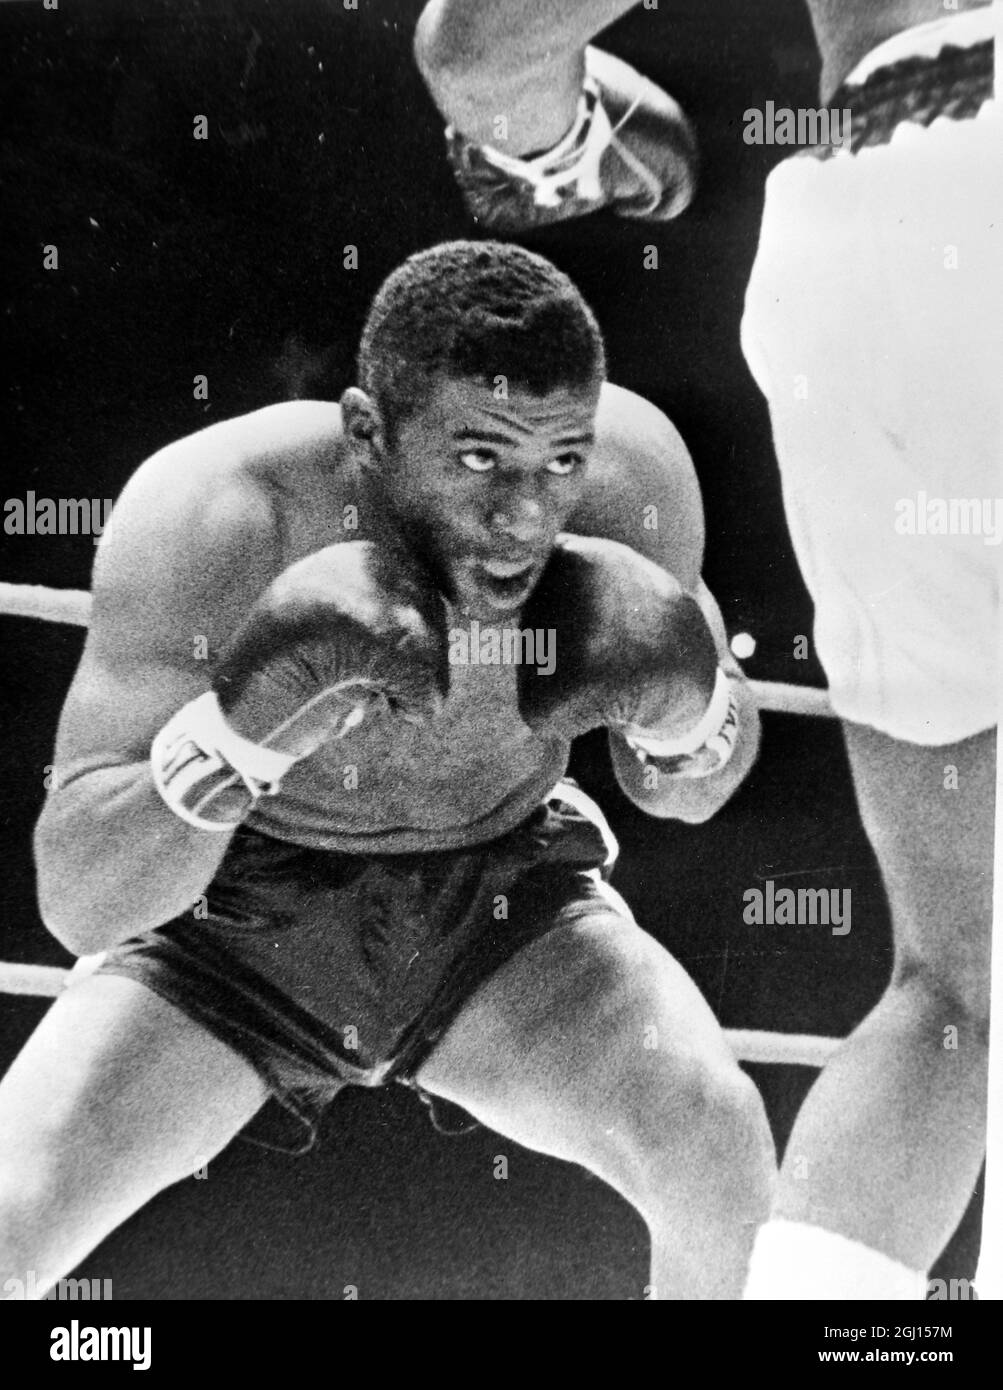 BOXER SONNY LISTON AND FLOYD PATTERSON IN ACTION - ; 27 SEPTEMBER 1962 Stock Photo